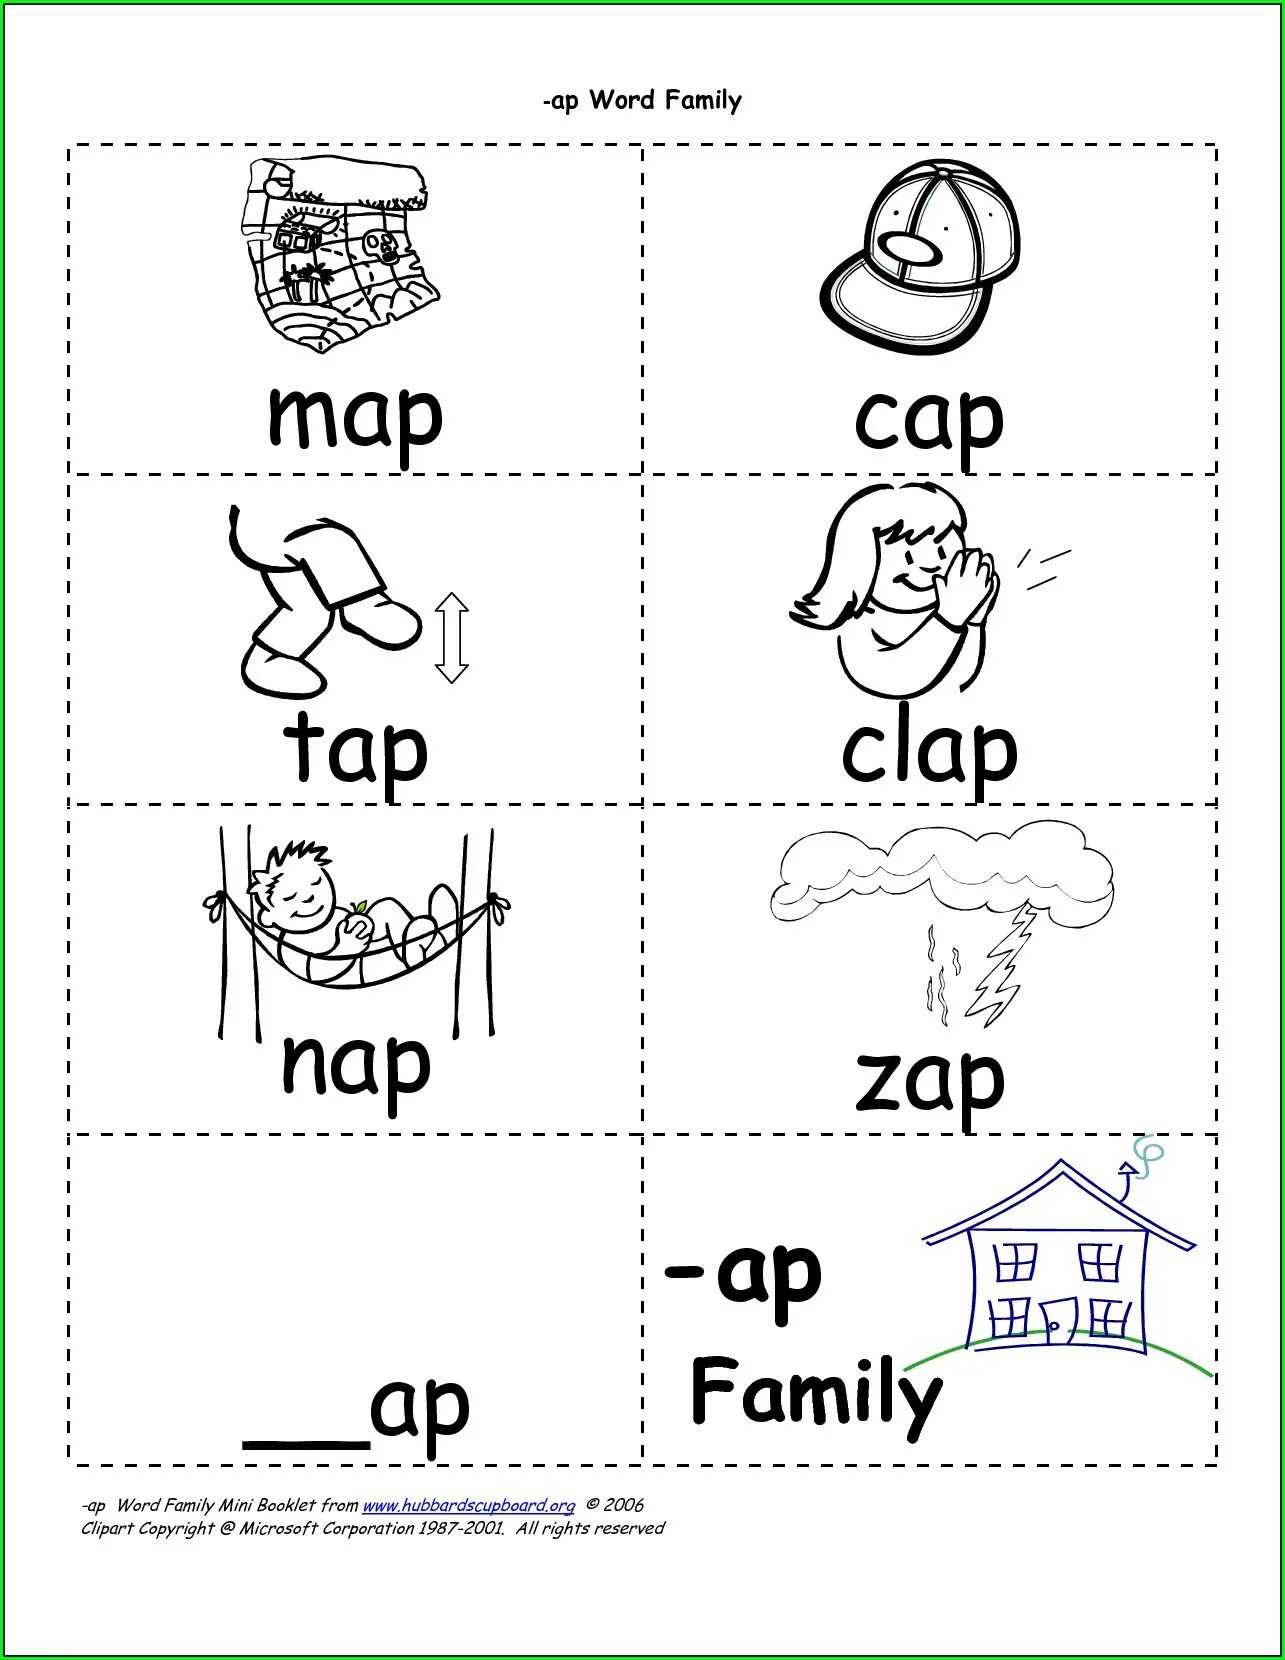 Make word family. Am Family Words. Word Families в английском языке. At Family Words. Family Words Worksheets.